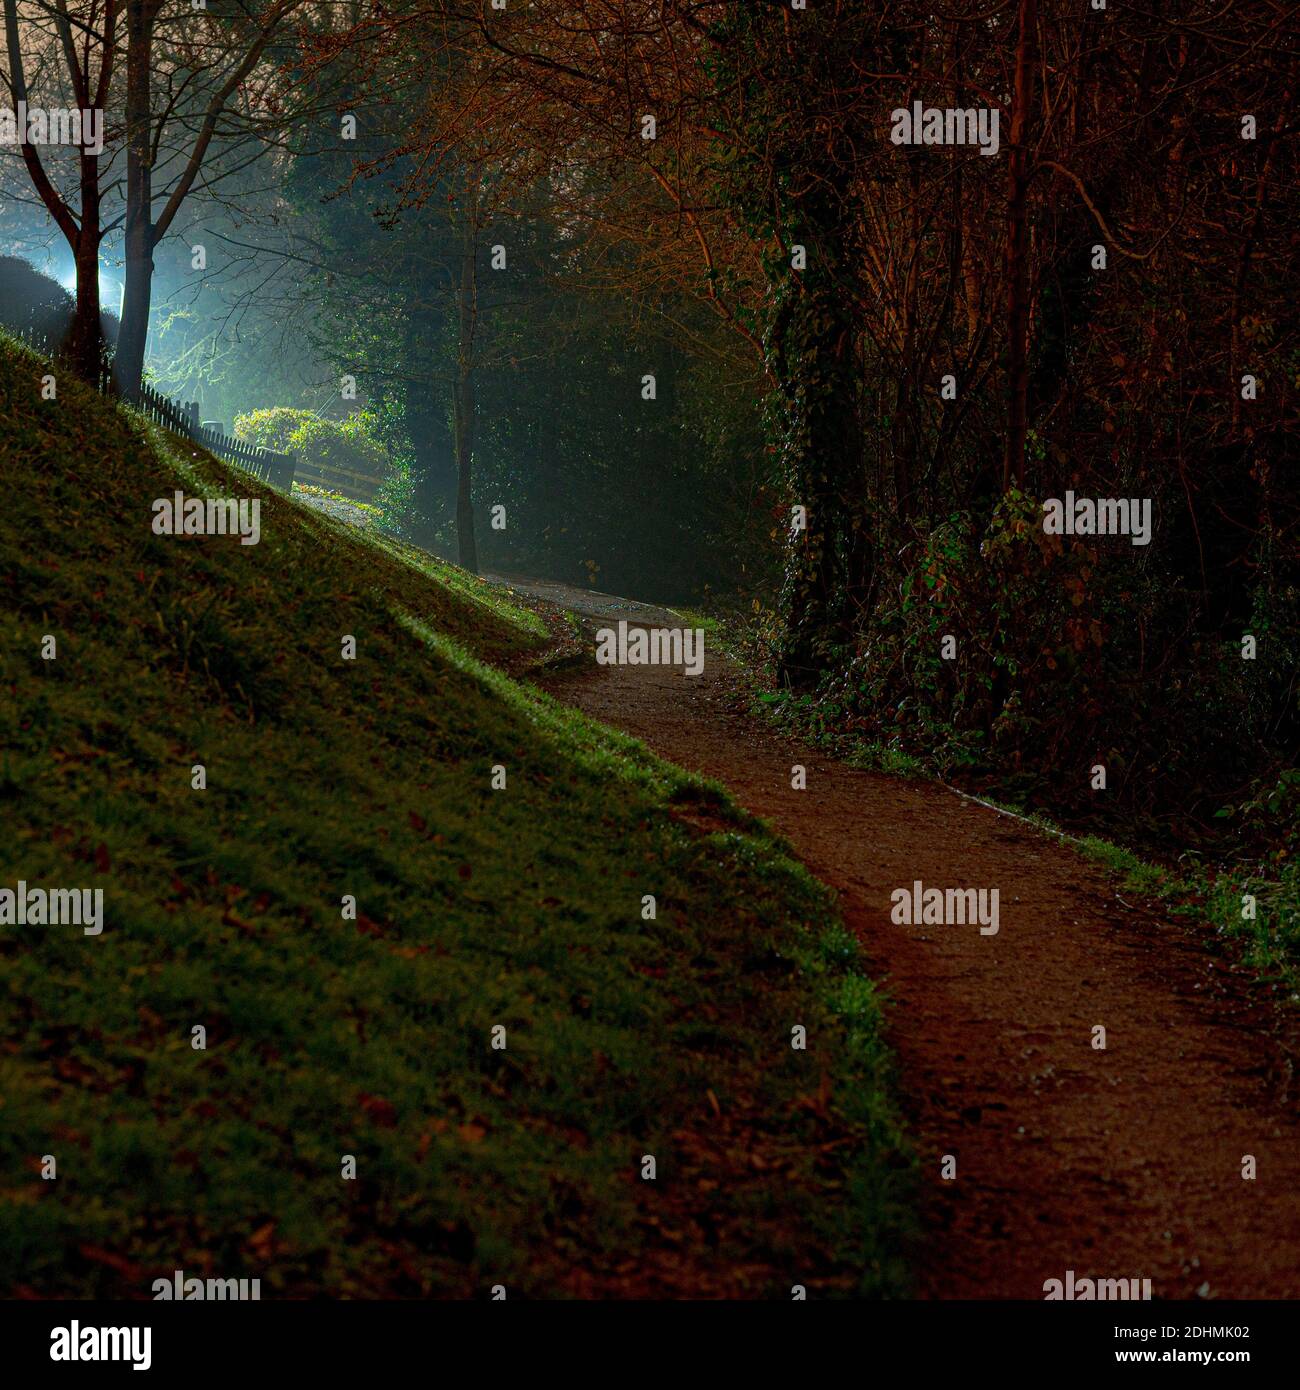 Nigh time image of eerily lit path besides trees and grassy incline with trees silhouetted Stock Photo